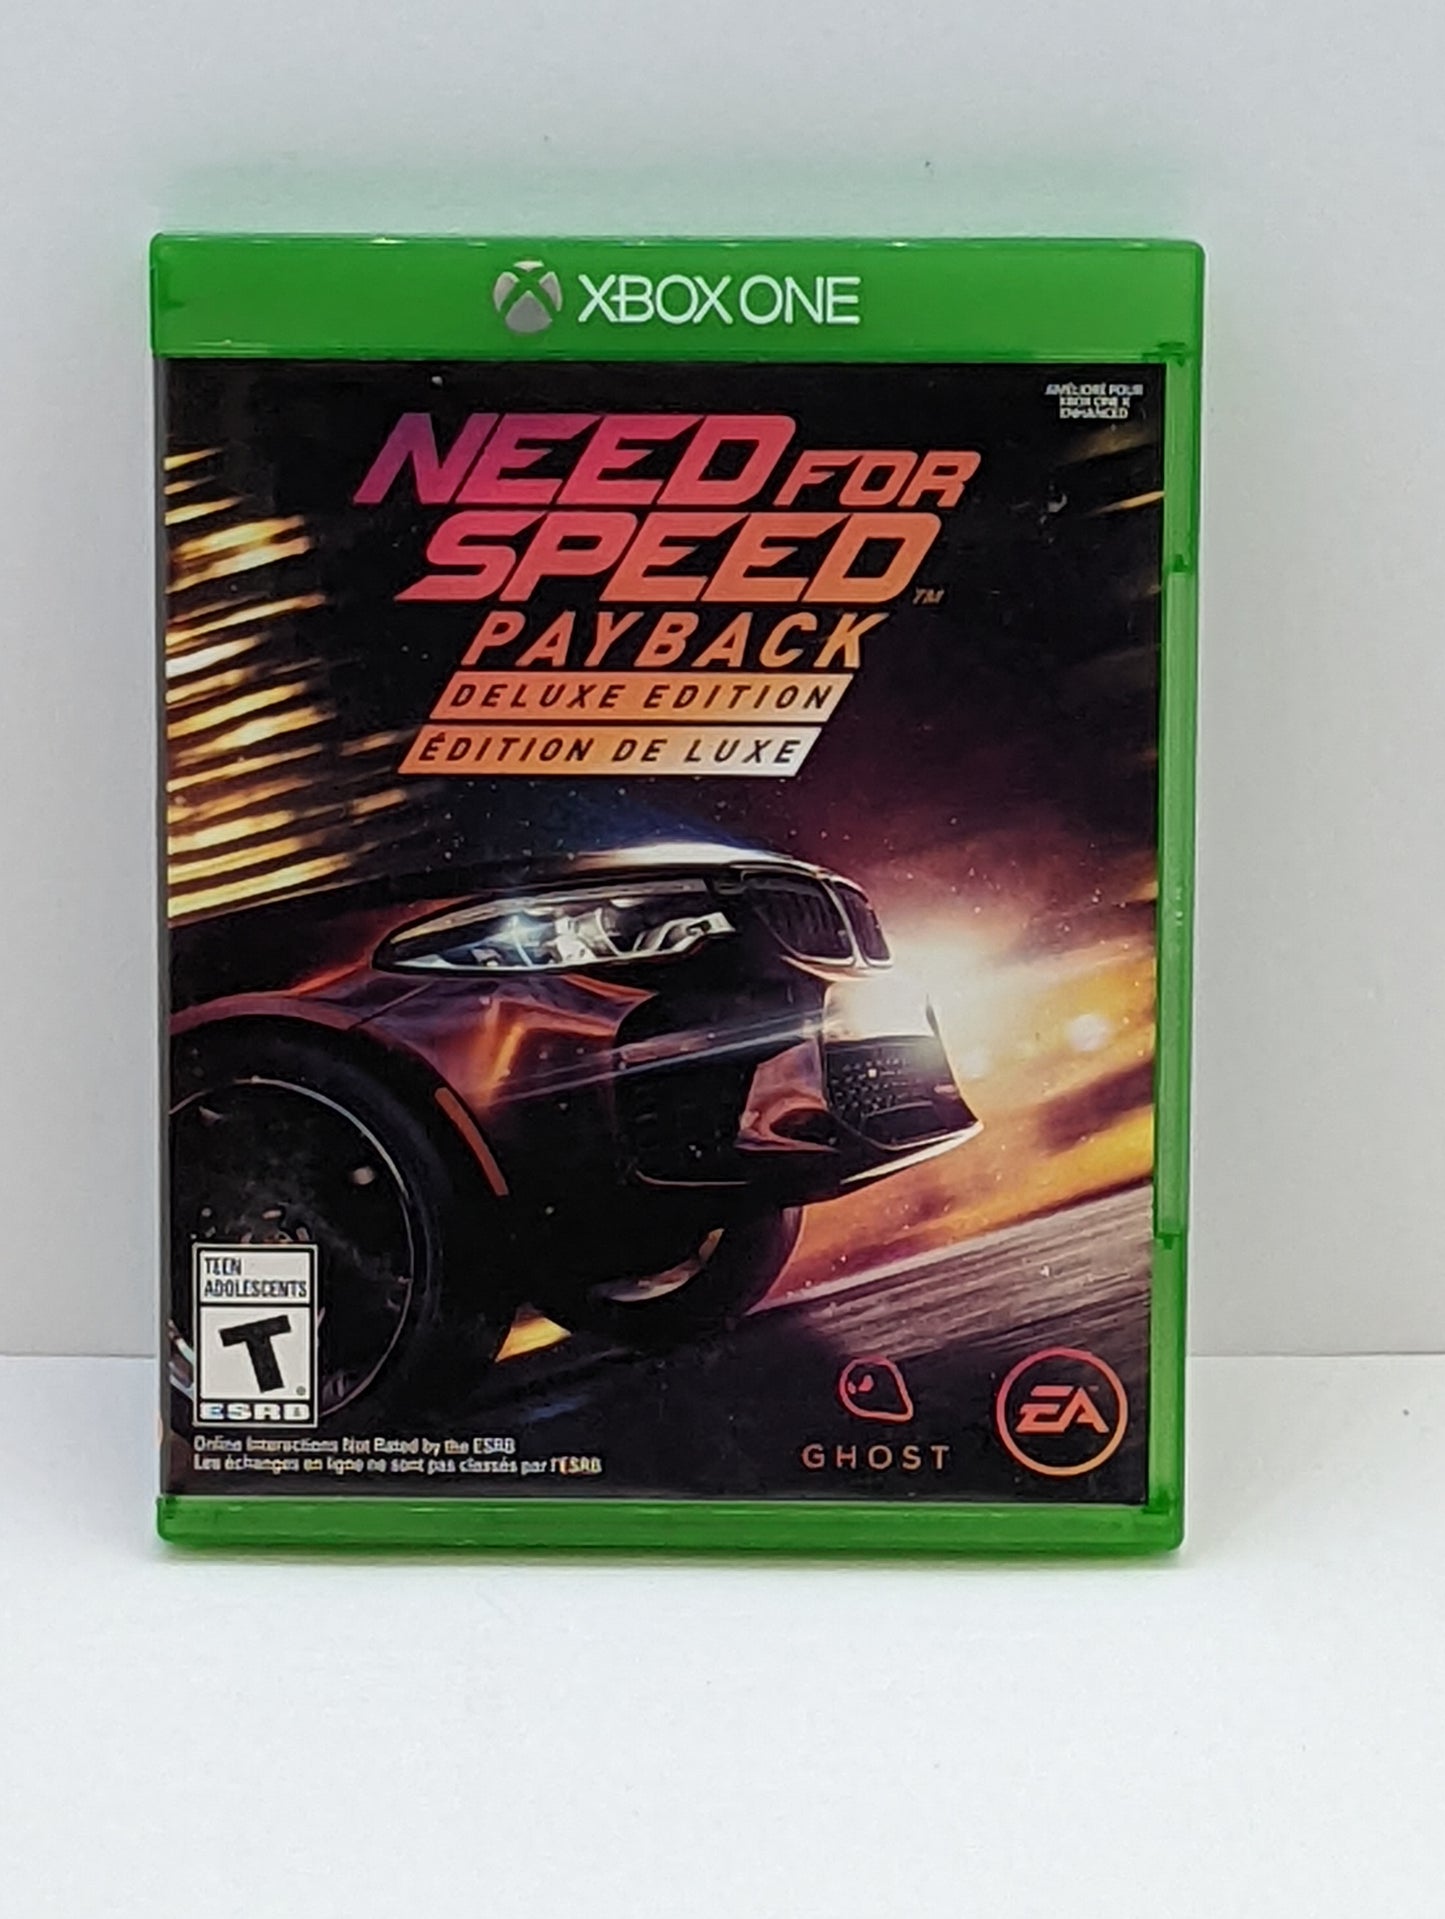 Xbox One Need for Speed Payback Deluxe Edition